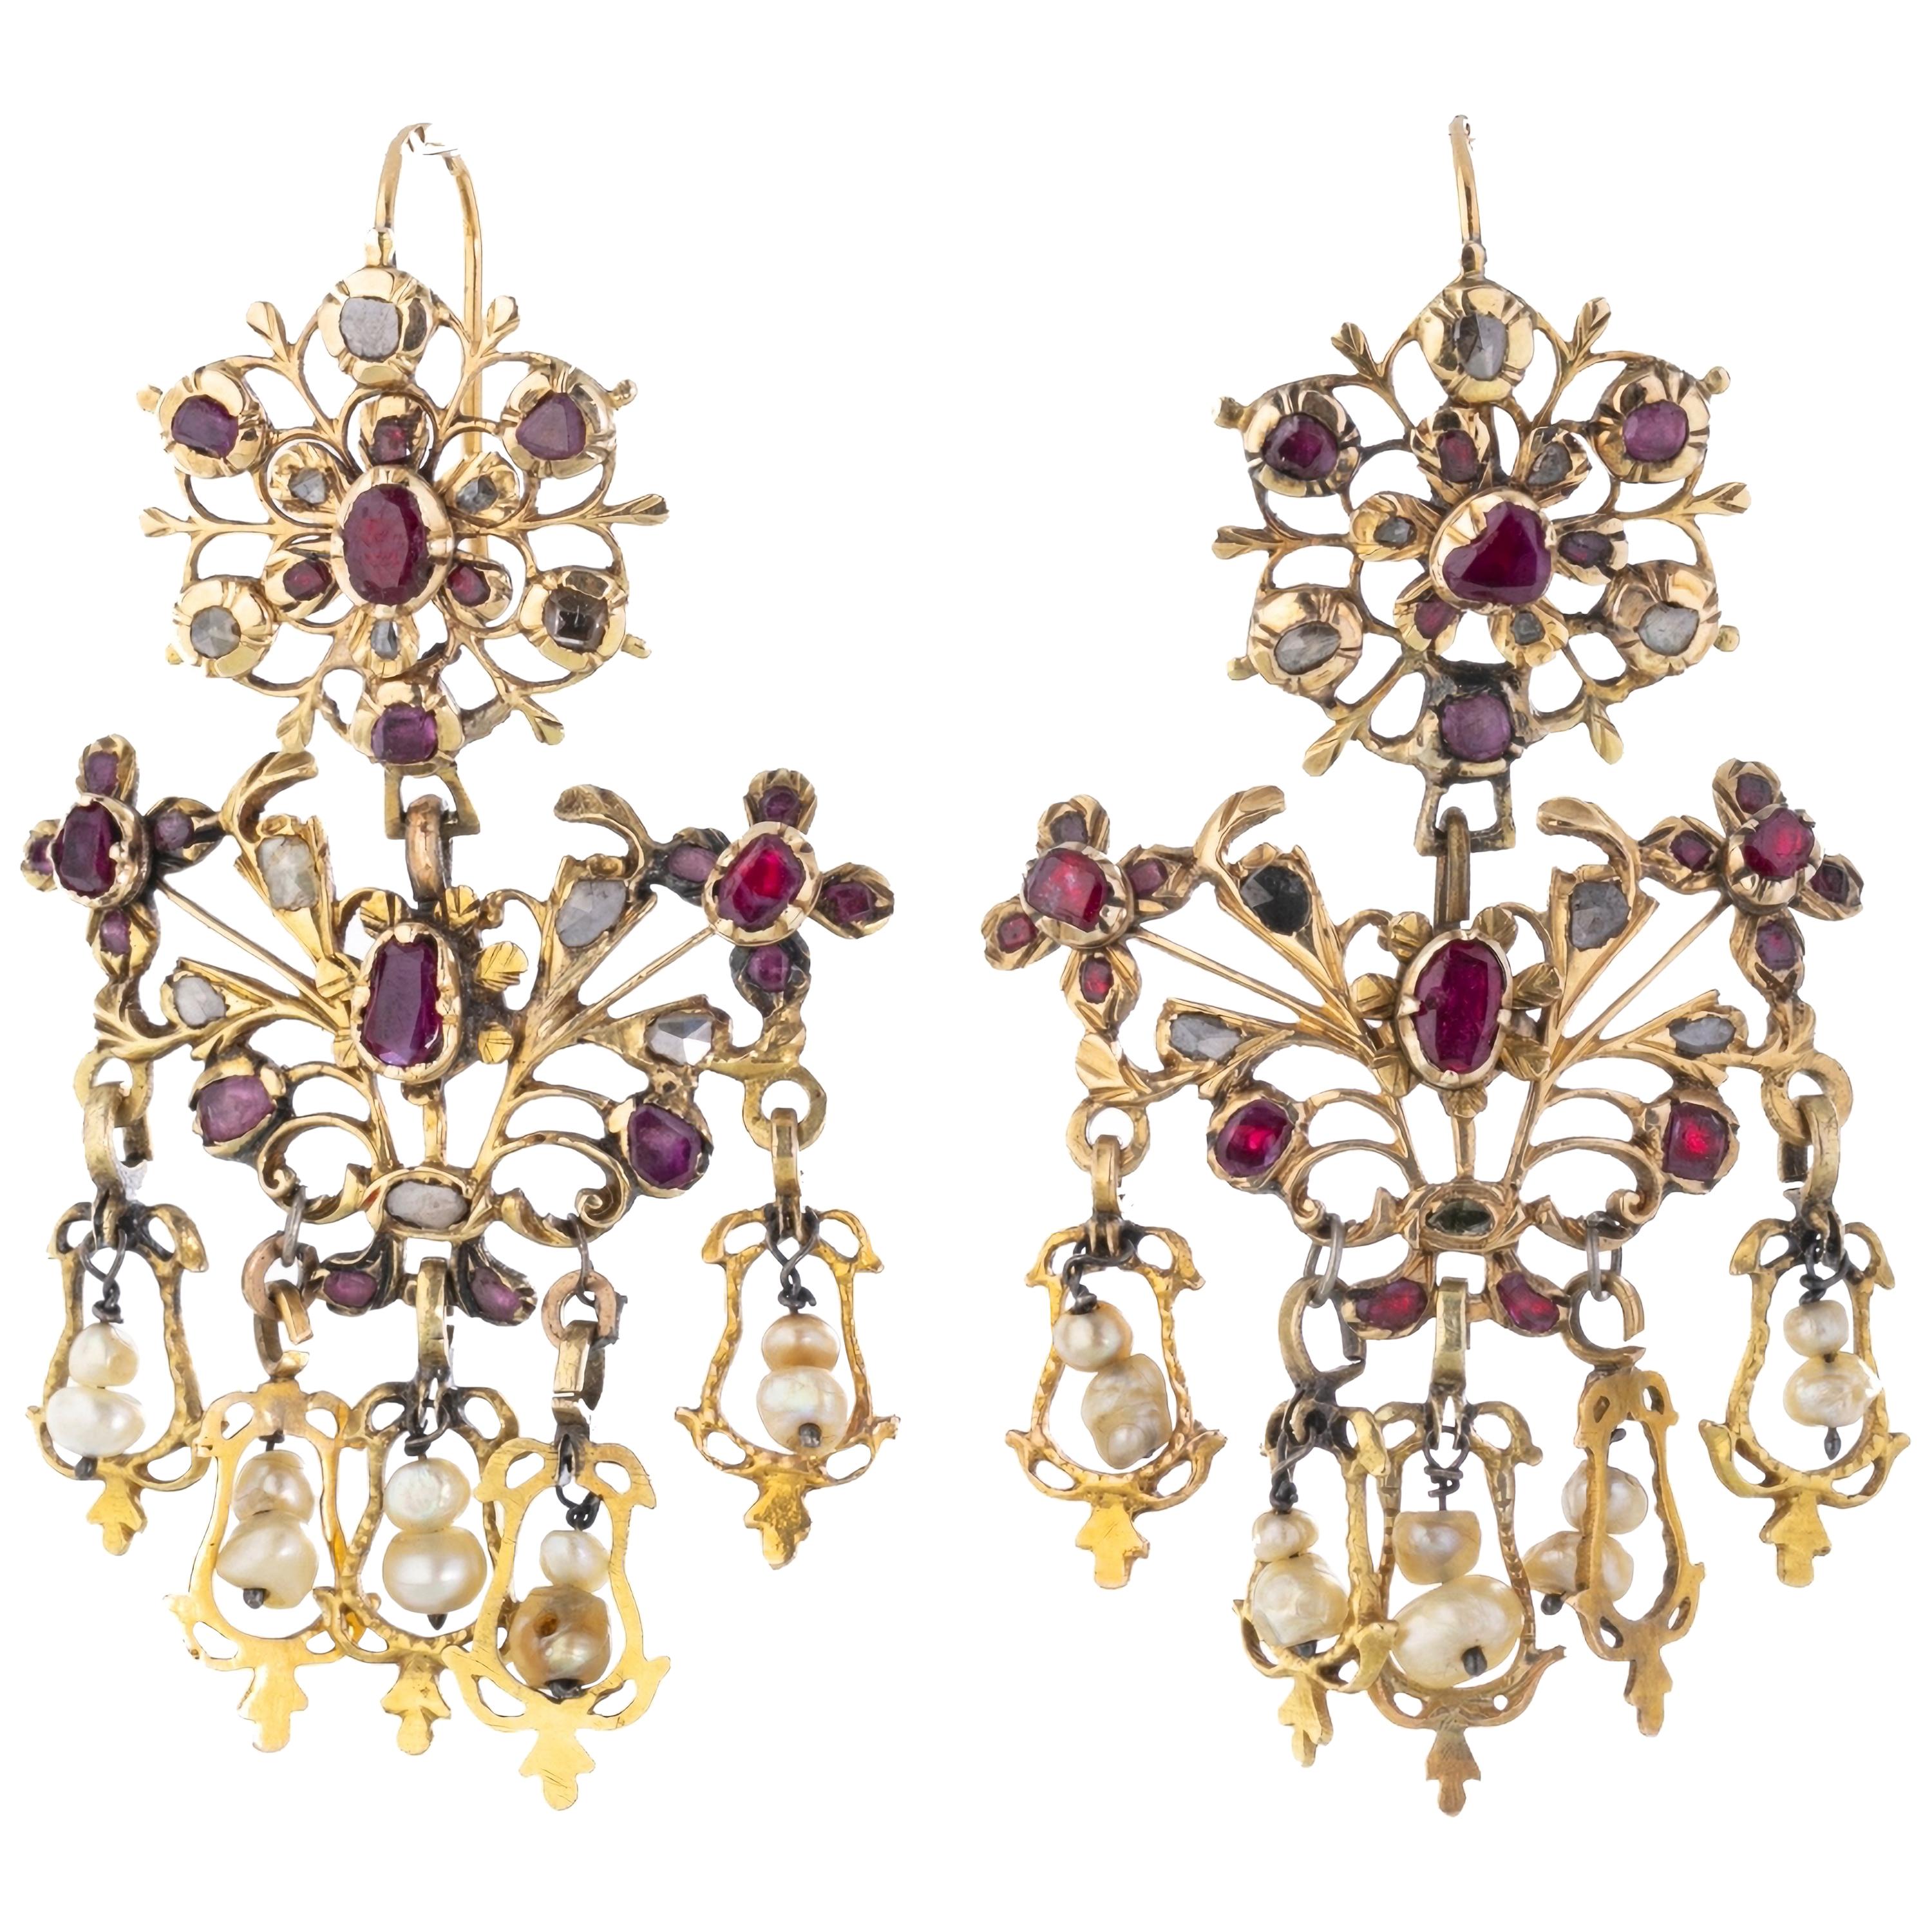 Pair of French 18th Century Gold Earrings